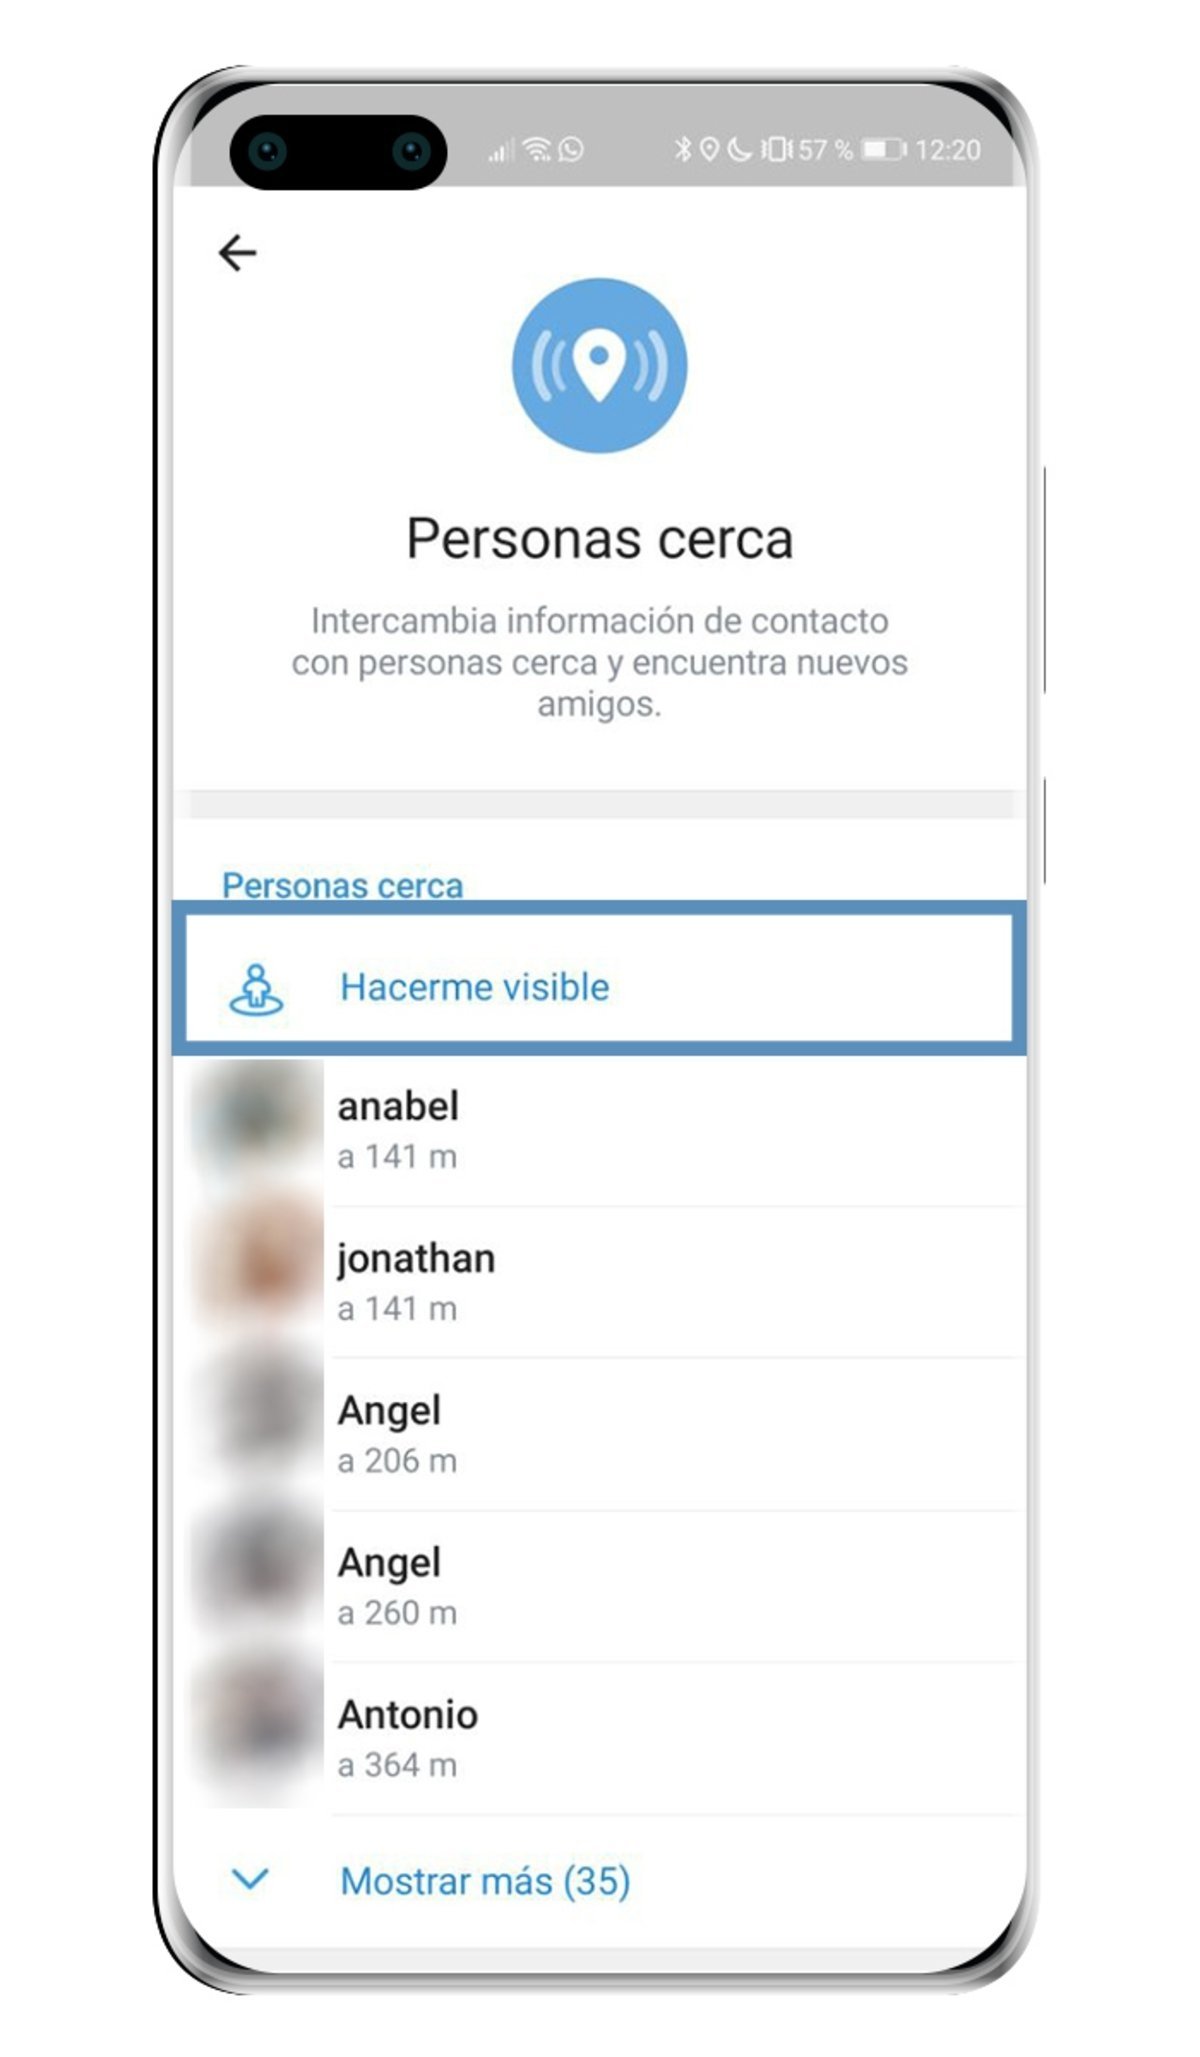 How to find people near you who also use Telegram